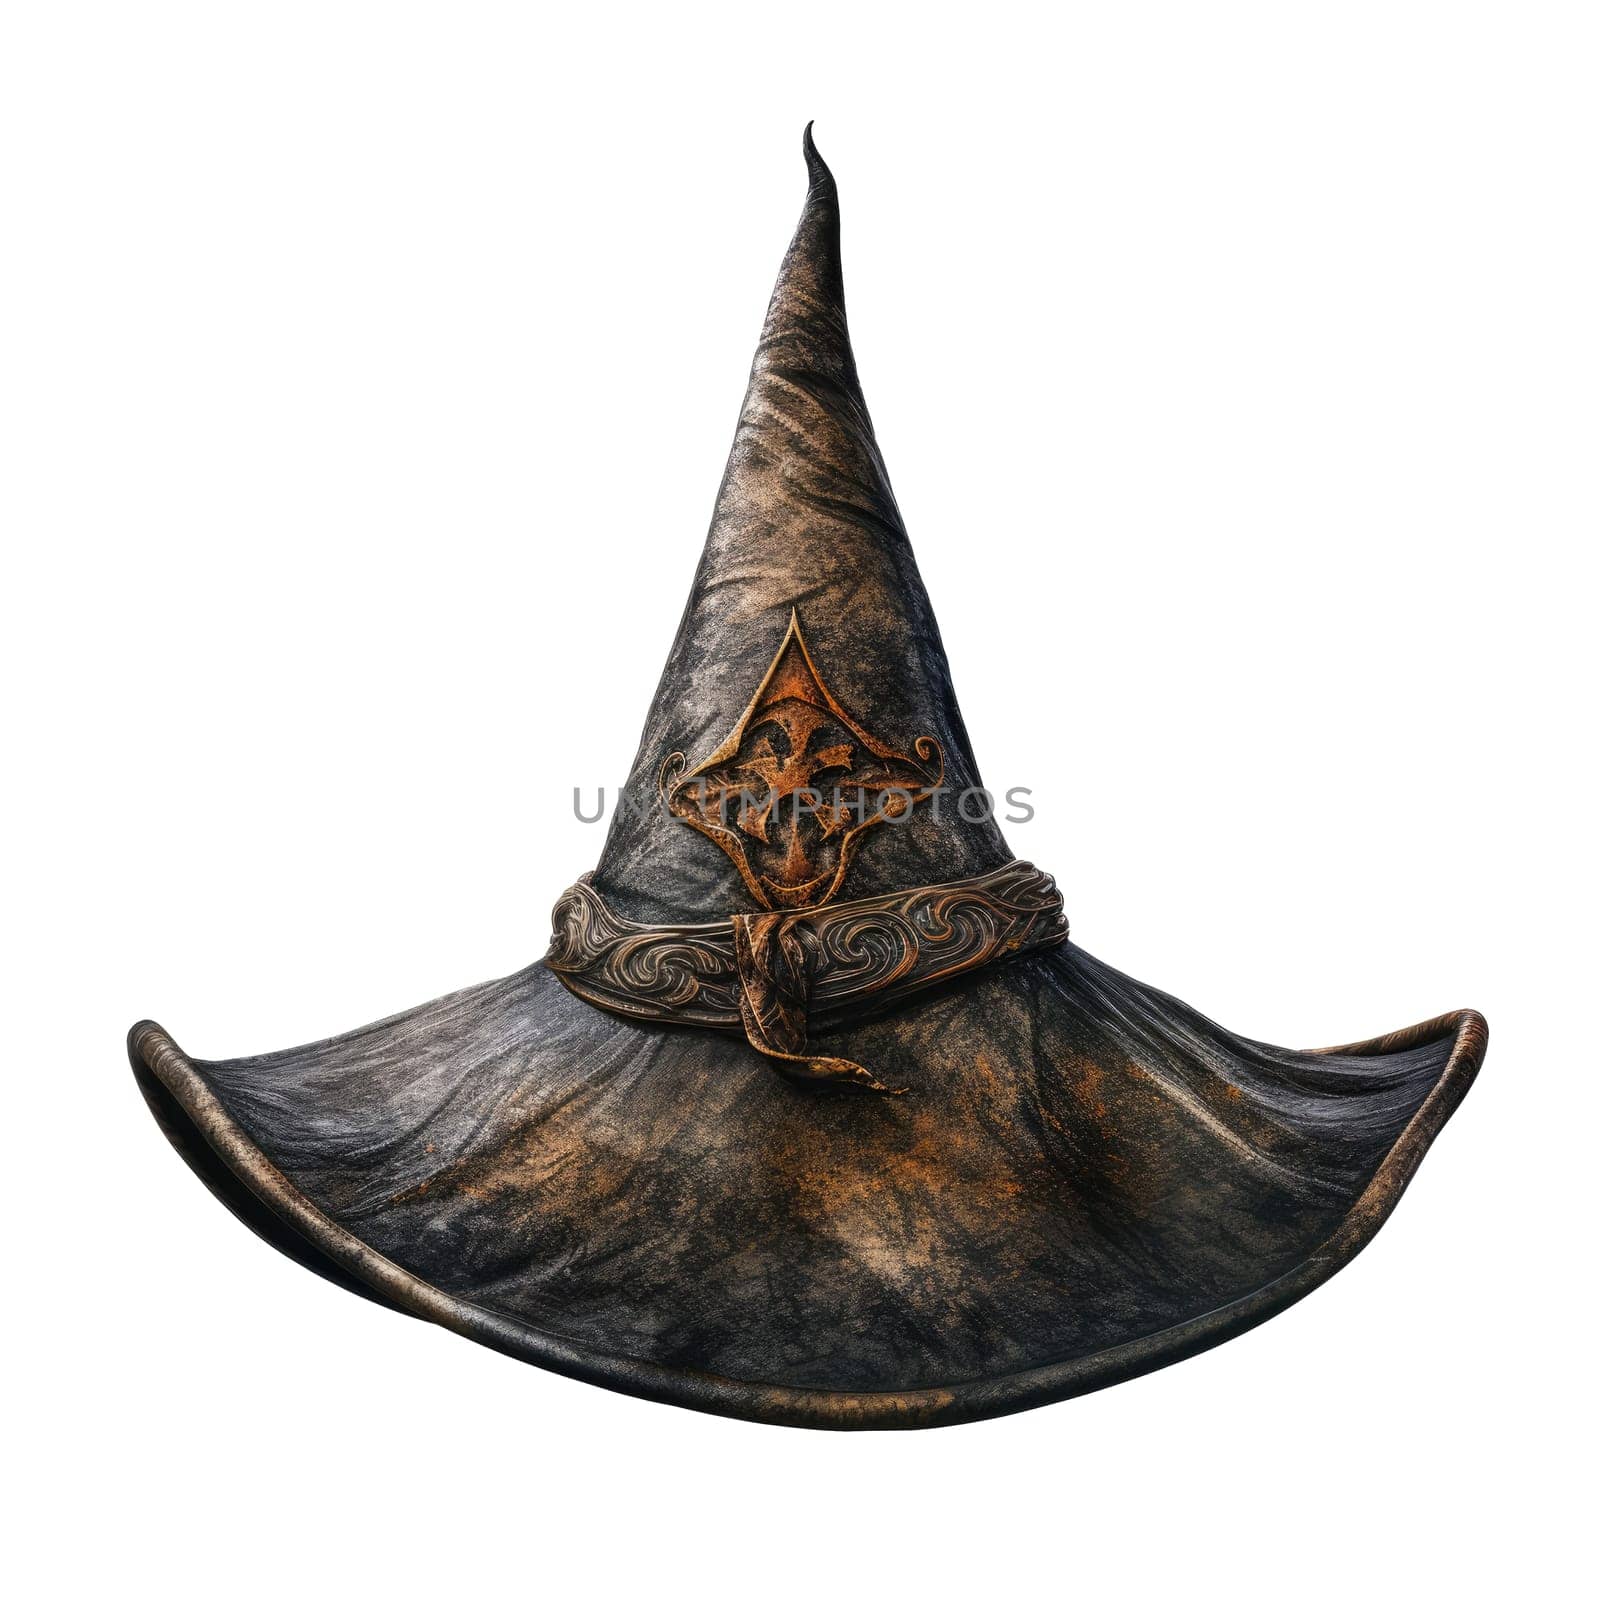 Black halloween witch hat isolated on white background by natali_brill